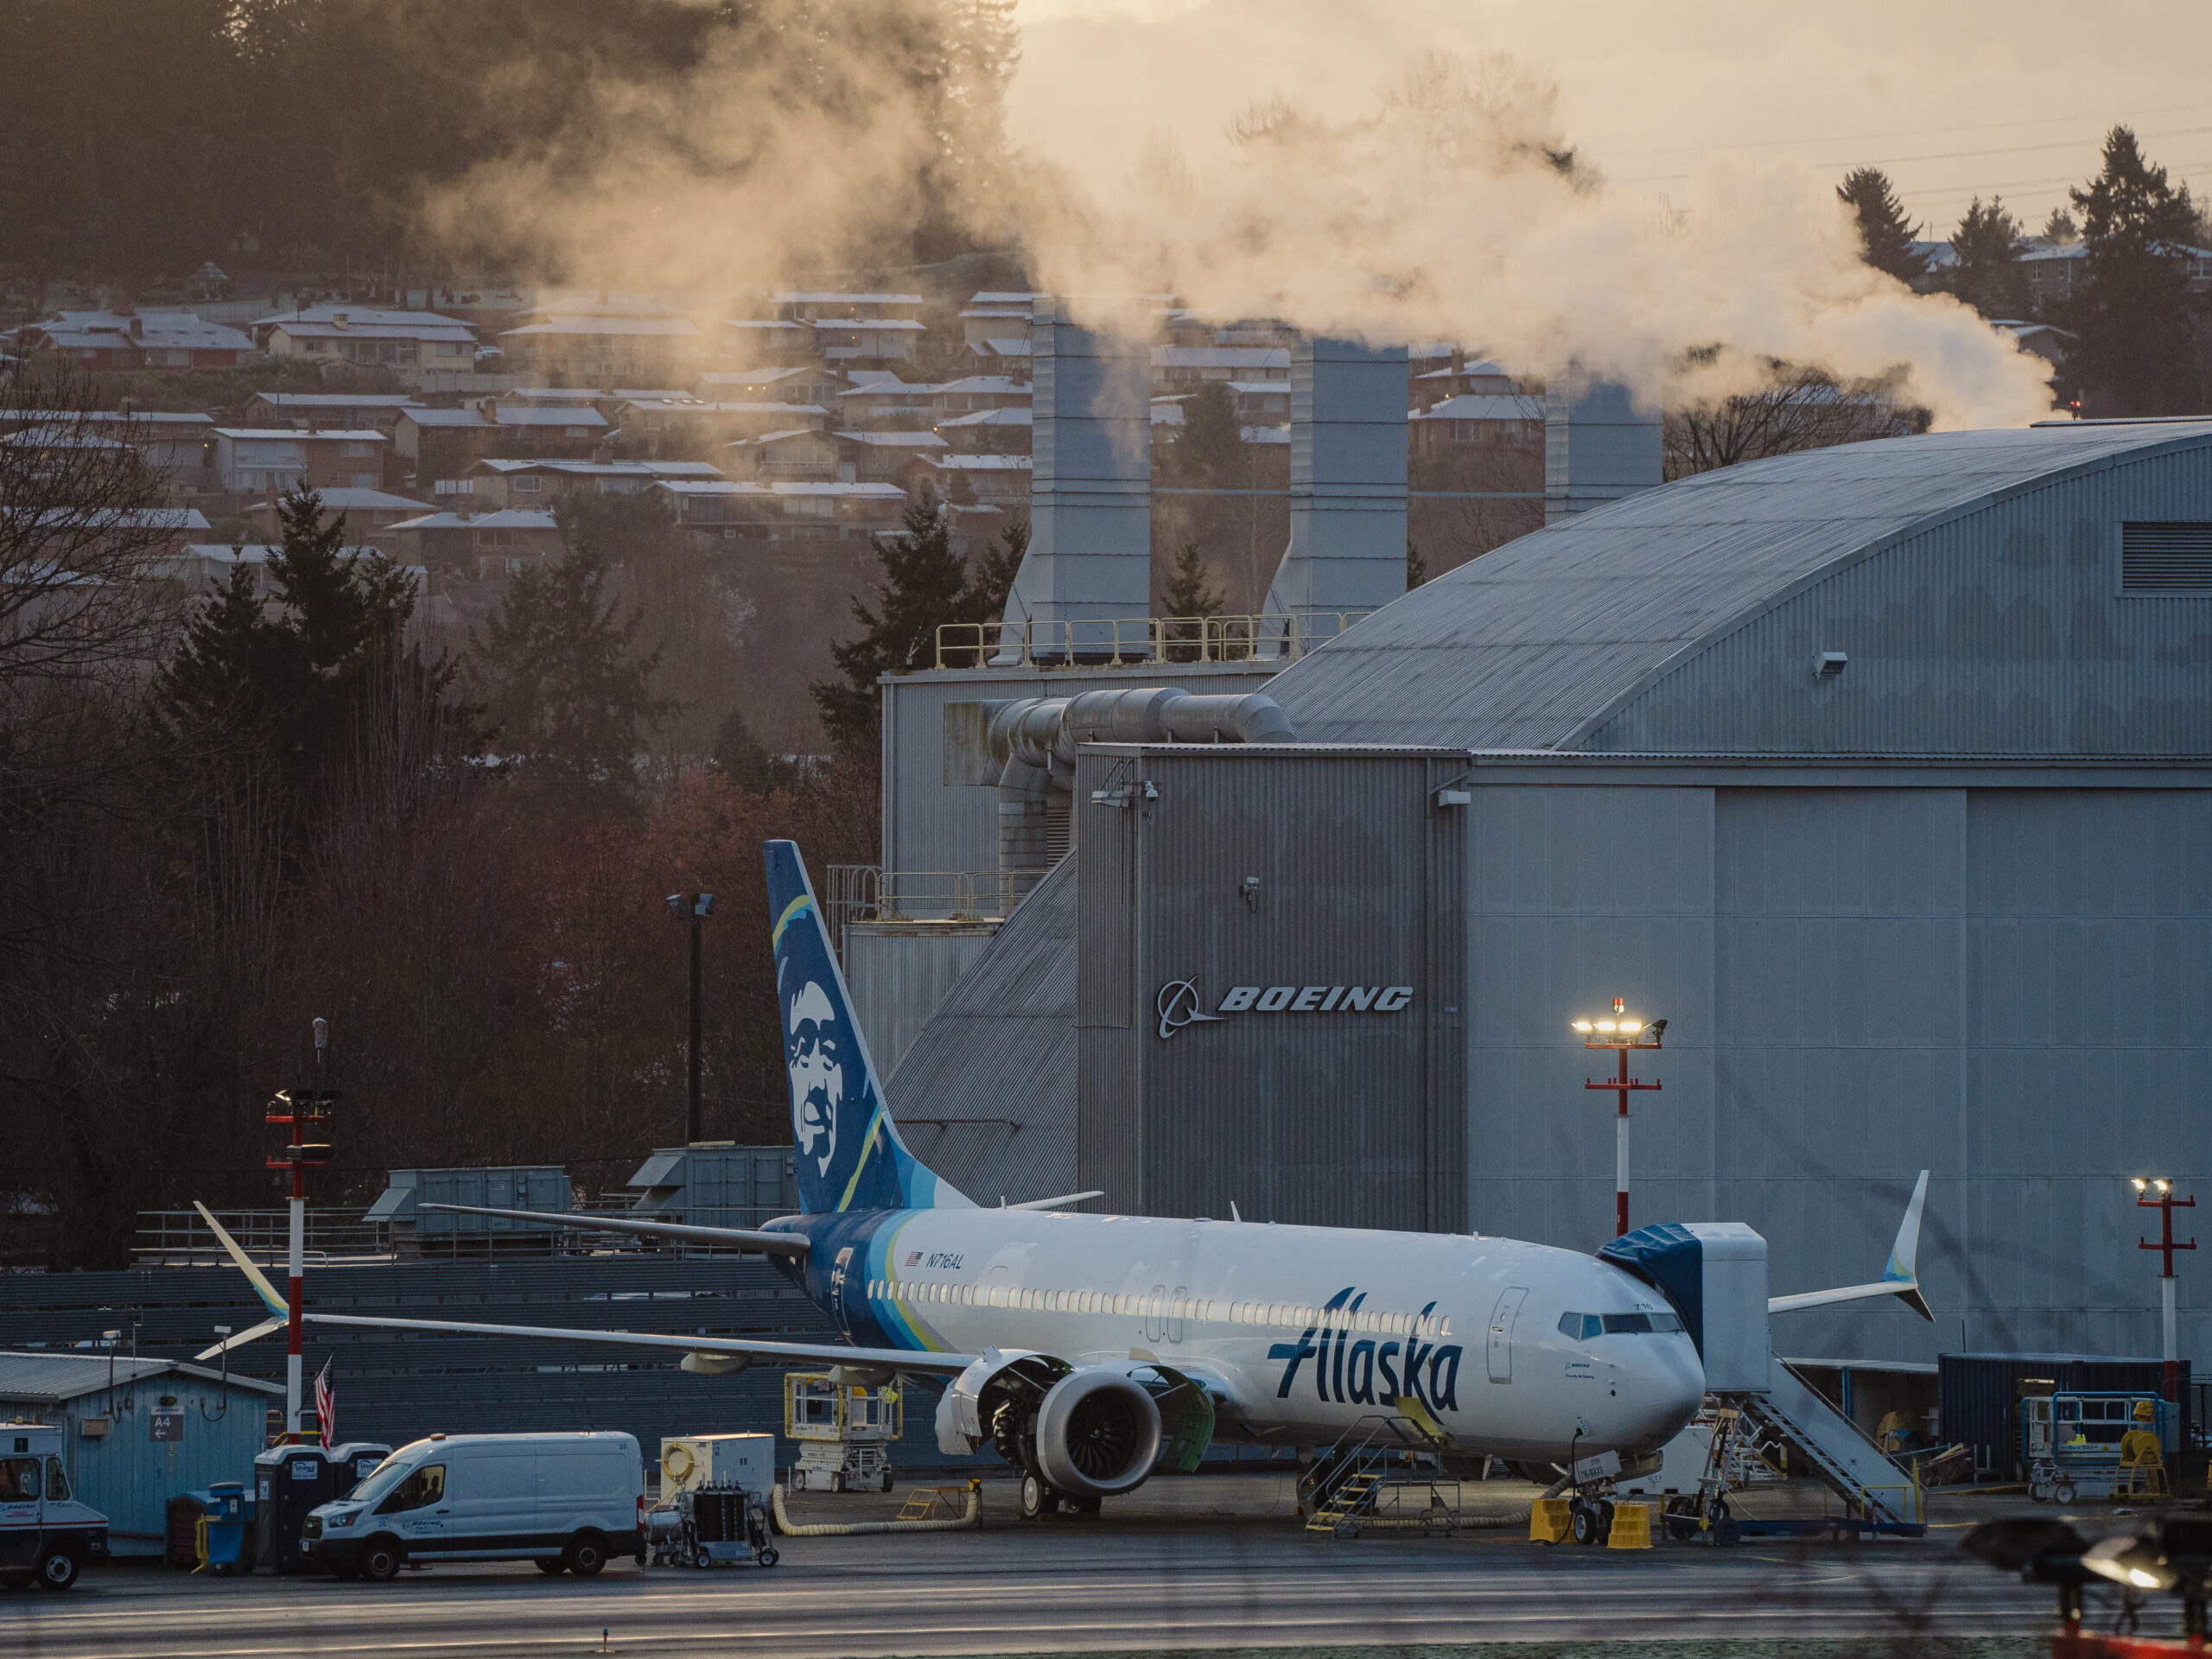 Boeing commits to addressing issues highlighted by the FAA audit (Credits: WPR)